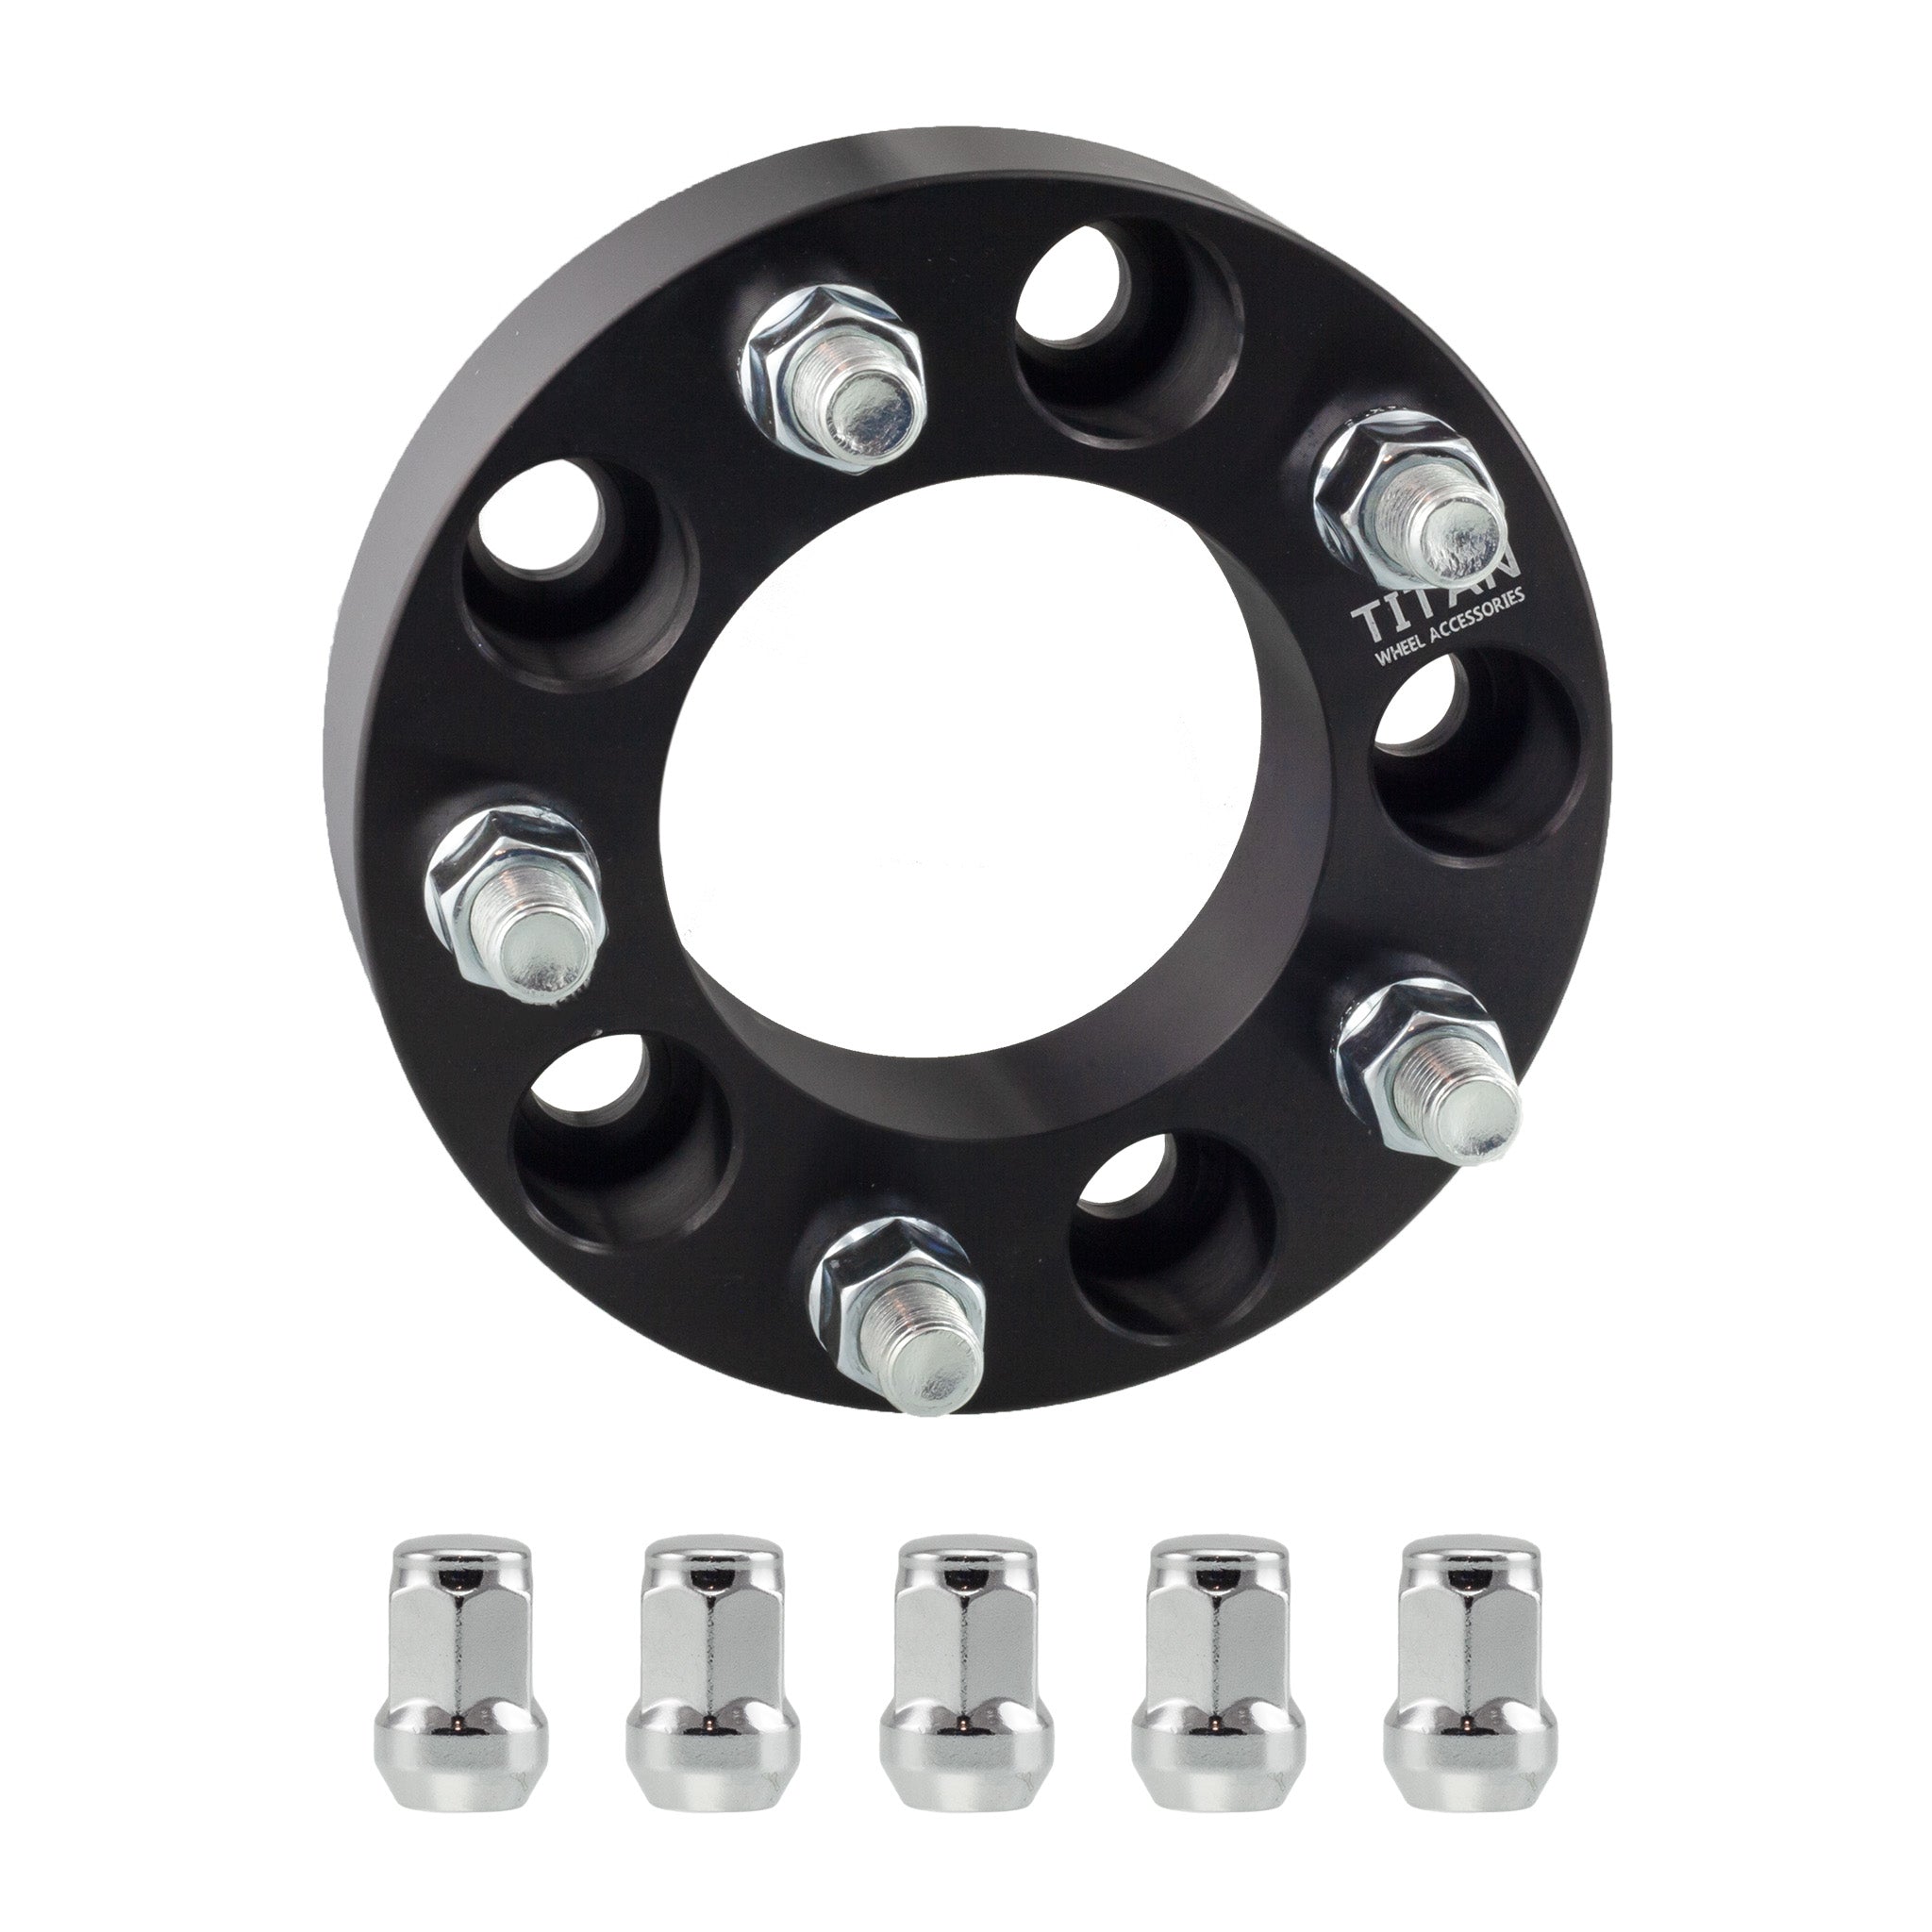 3 Inch Hubcentric Wheel Spacers for Nissan Infiniti Cars | 5x114.3